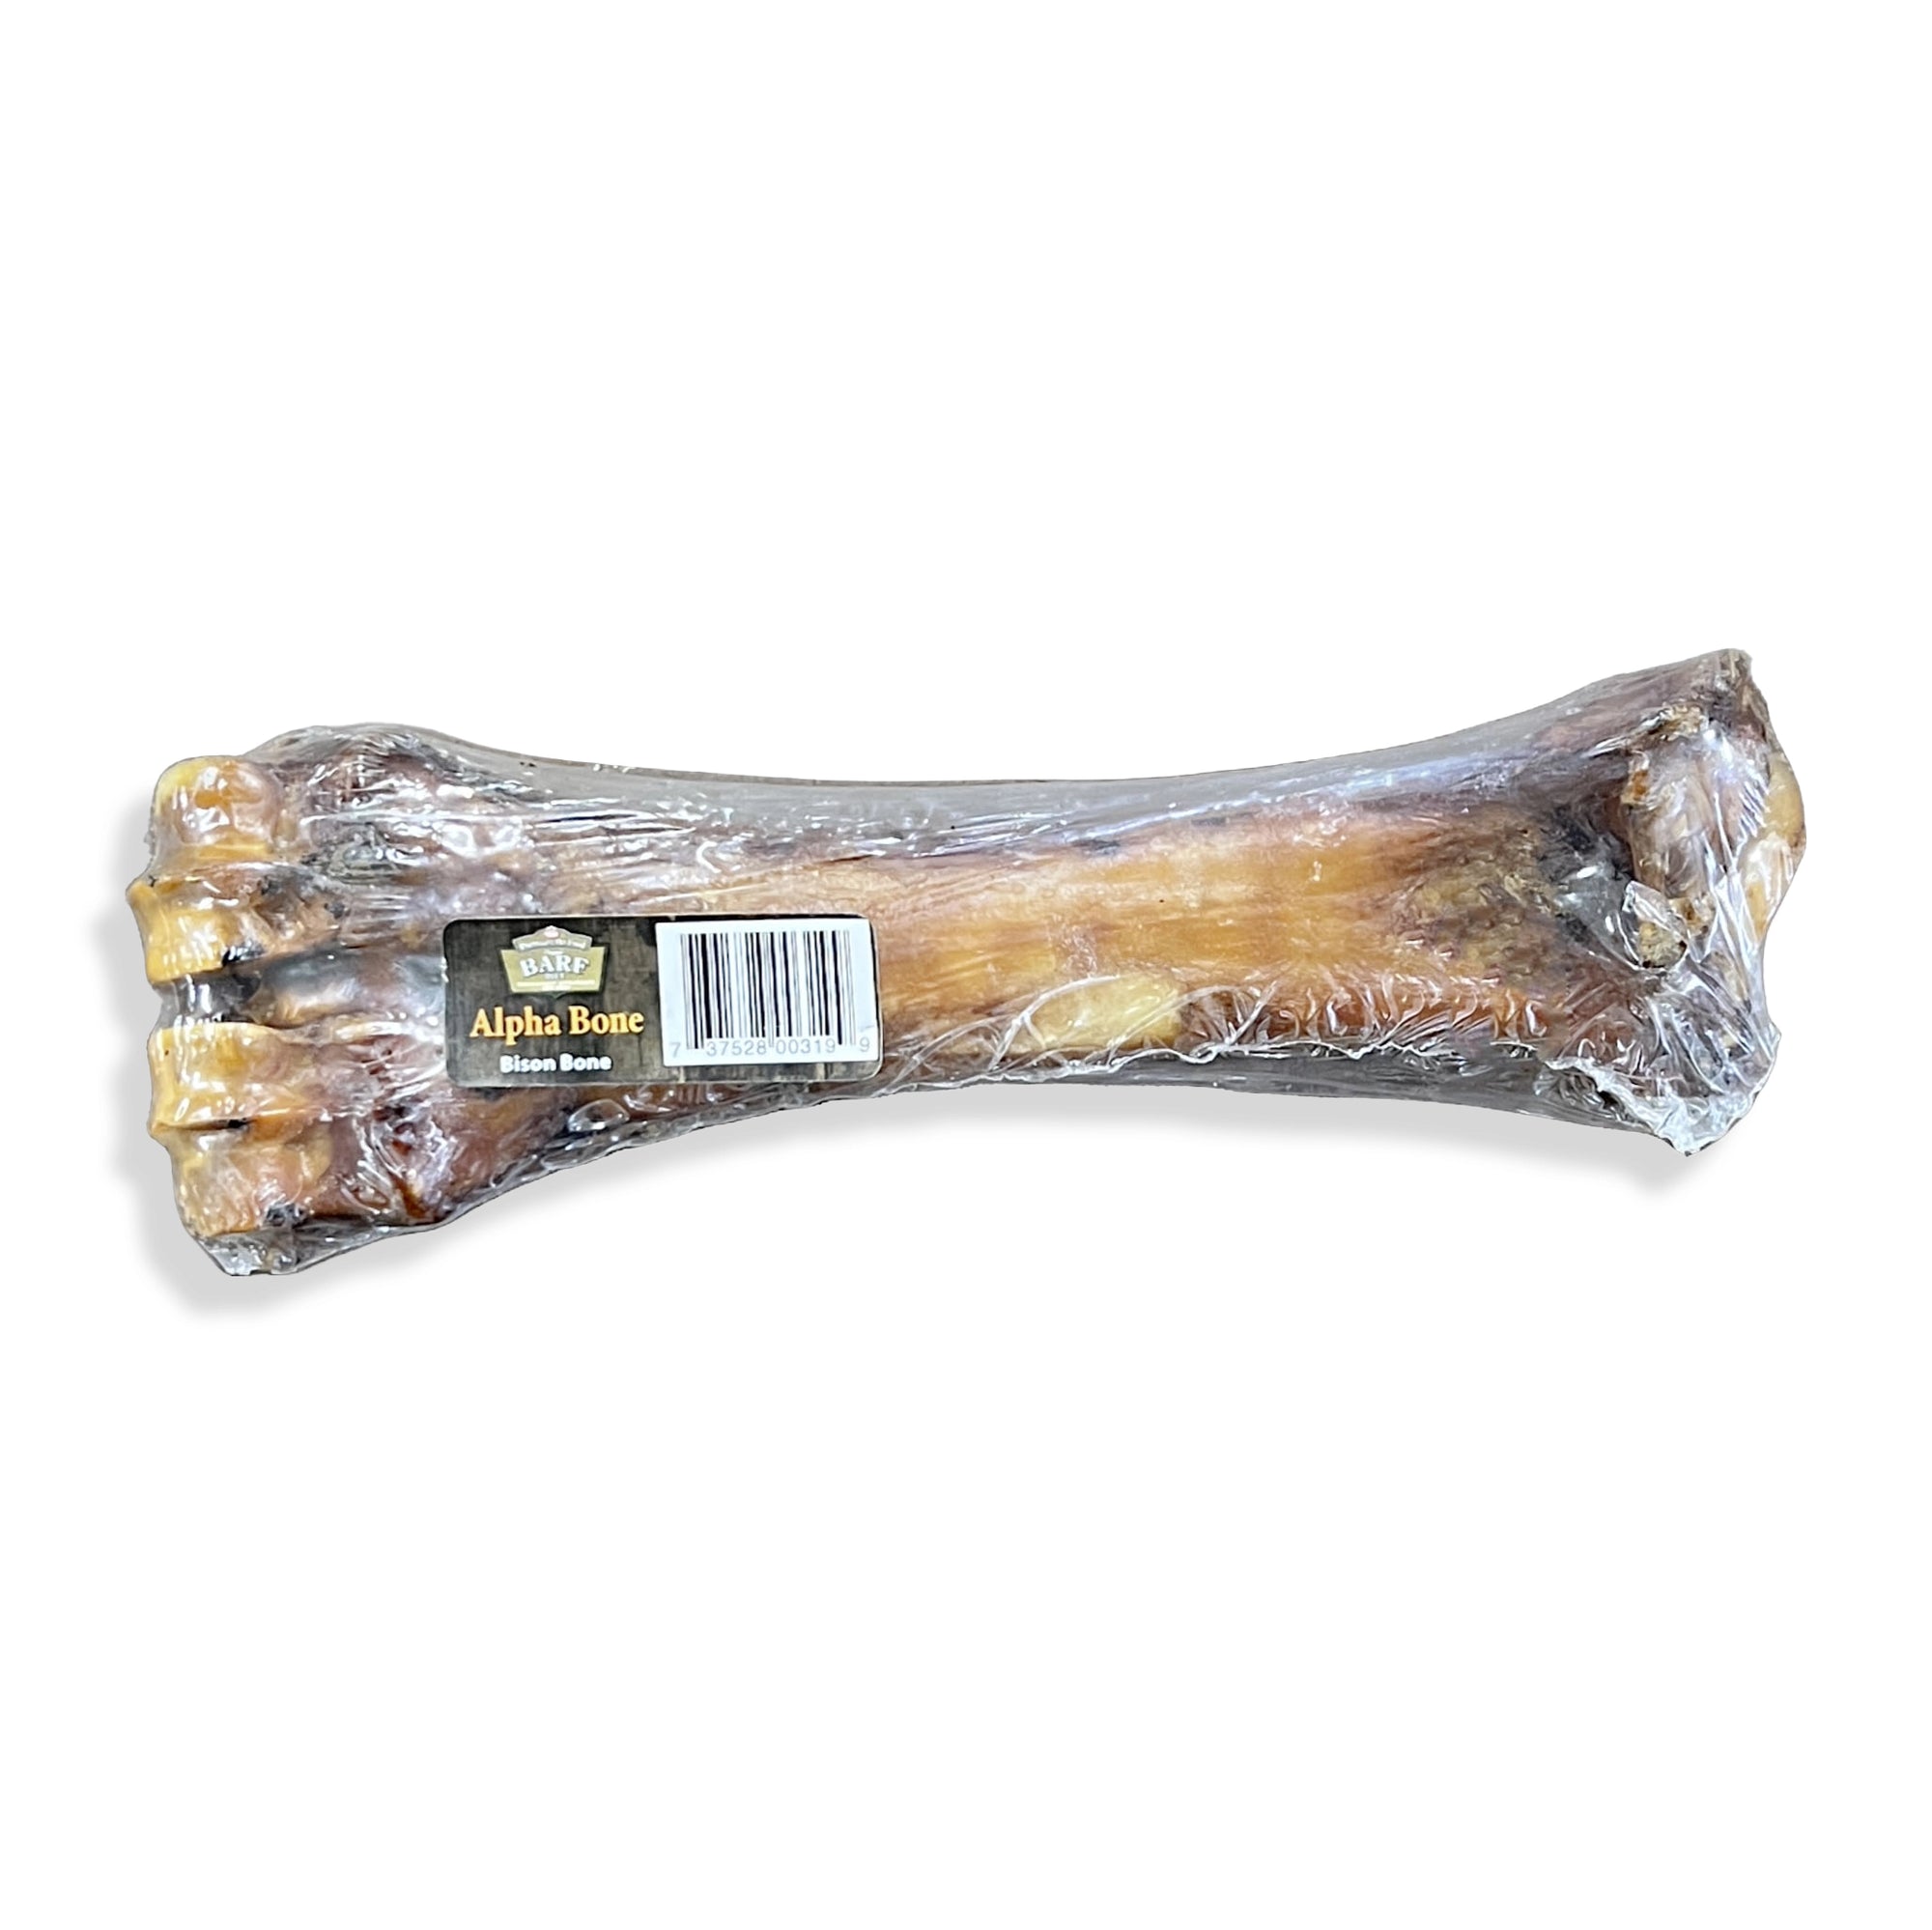 Alpha bone for dogs sealed in plastic wrap